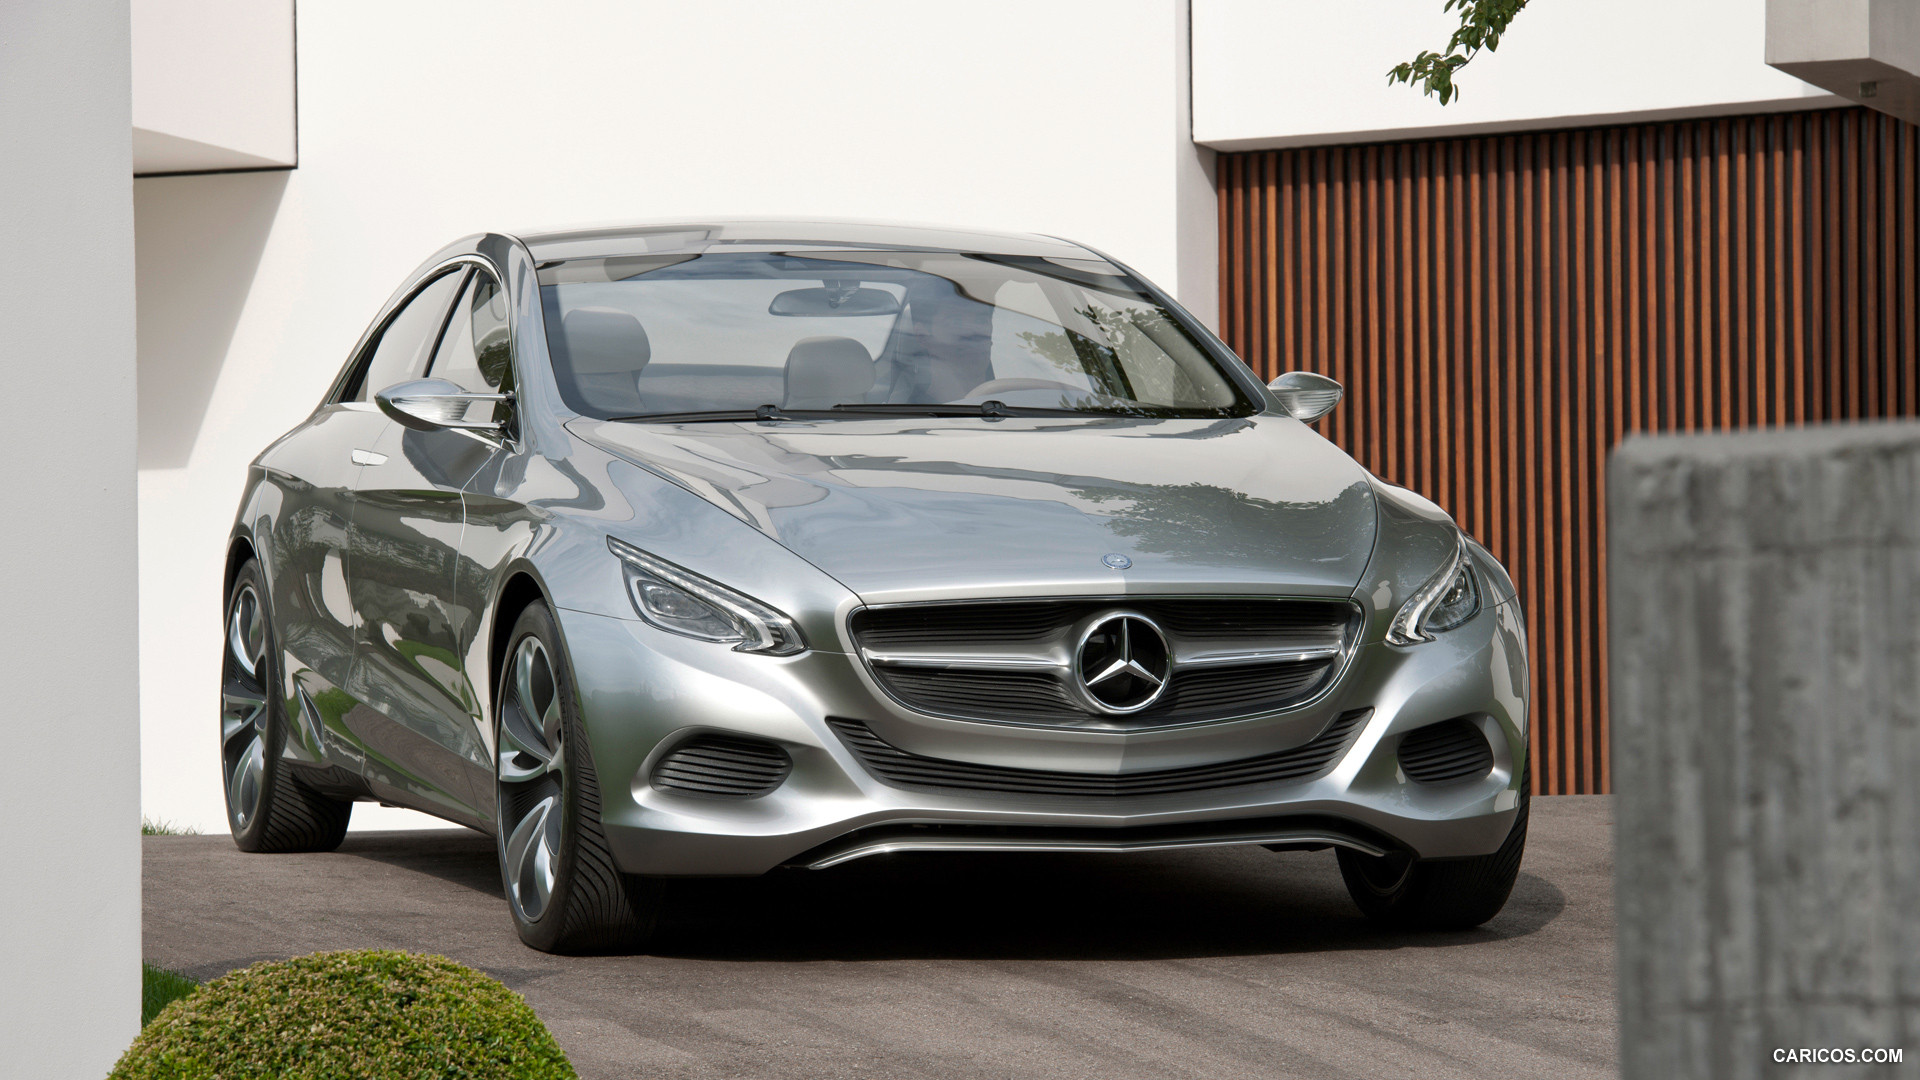 Mercedes-Benz F800 Style Concept (2010)  - Front Angle , #31 of 120